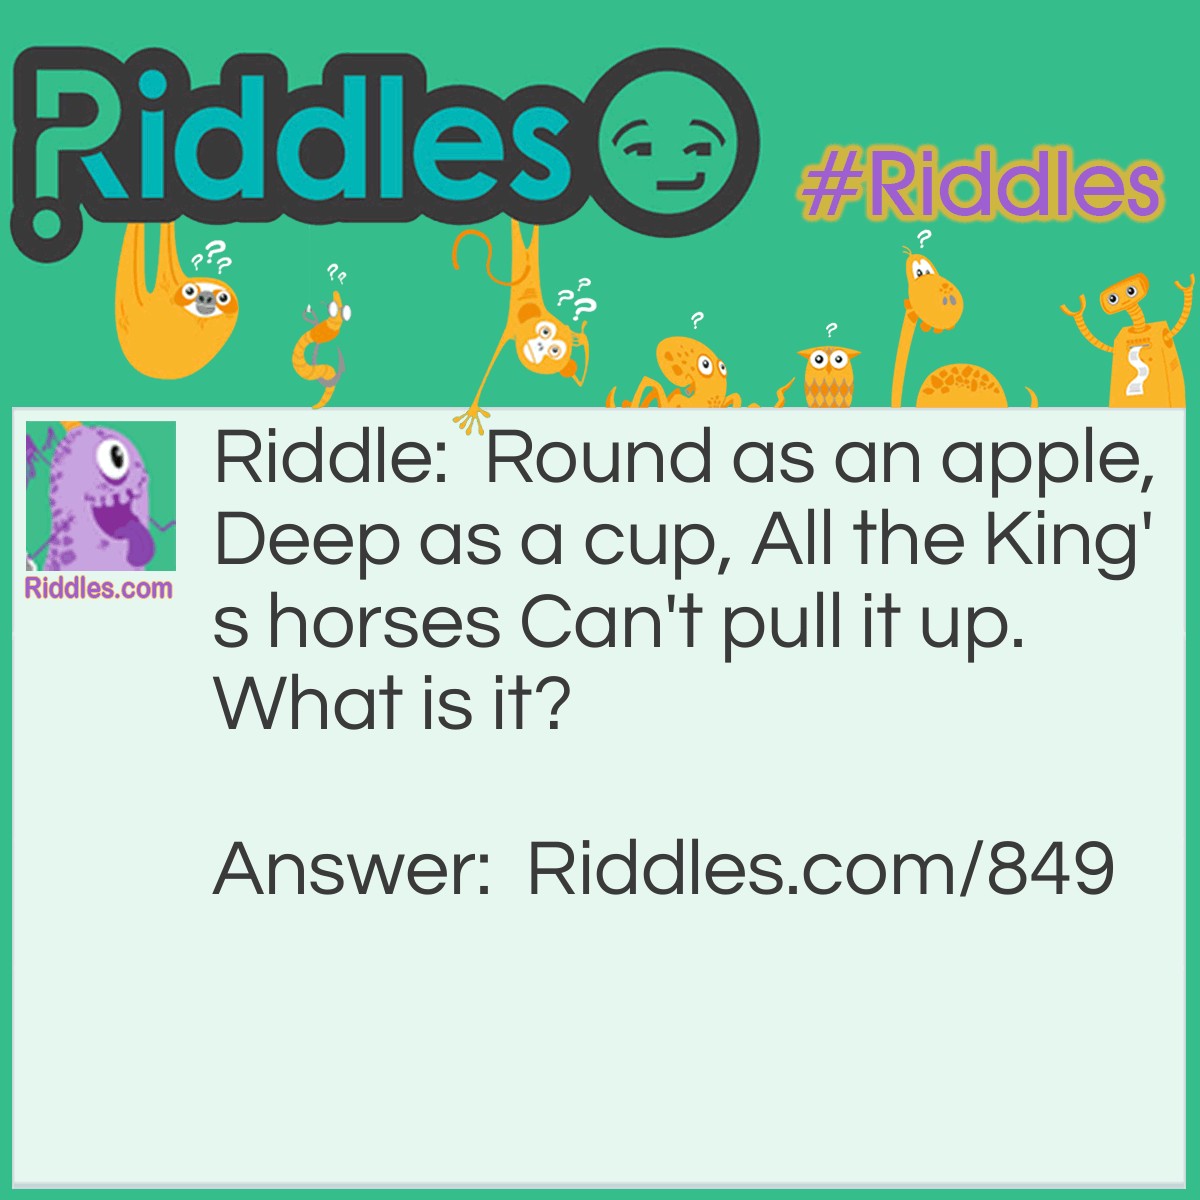 Riddle: Round as an apple, Deep as a cup, All the King's horses Can't pull it up.
What is it? Answer: It is a well.